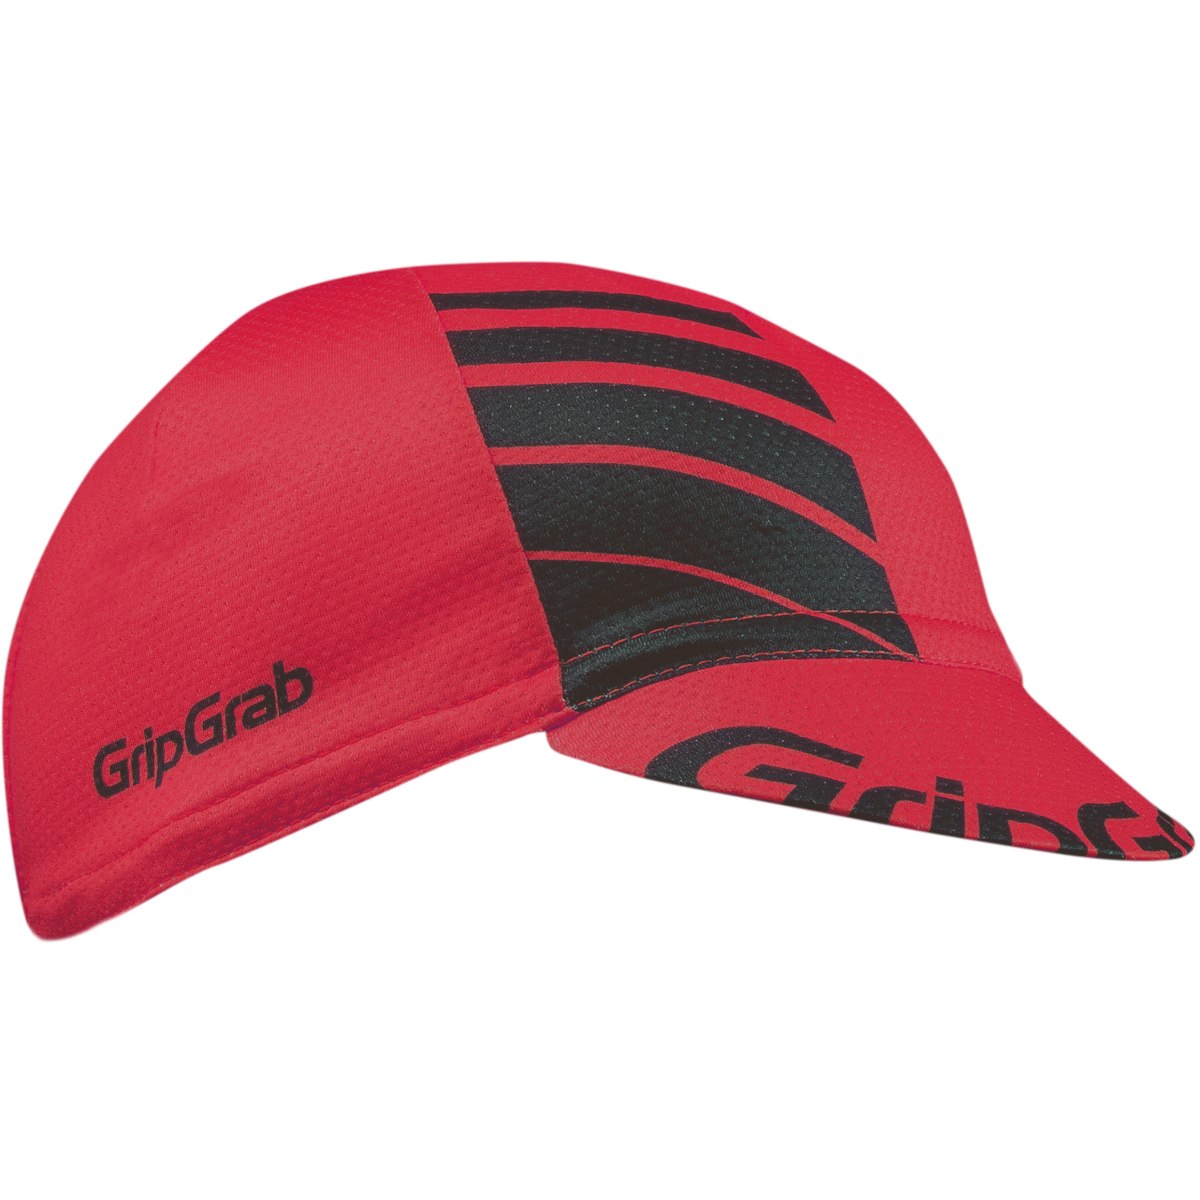 Picture of GripGrab Lightweight Summer Cycling Cap - red/black